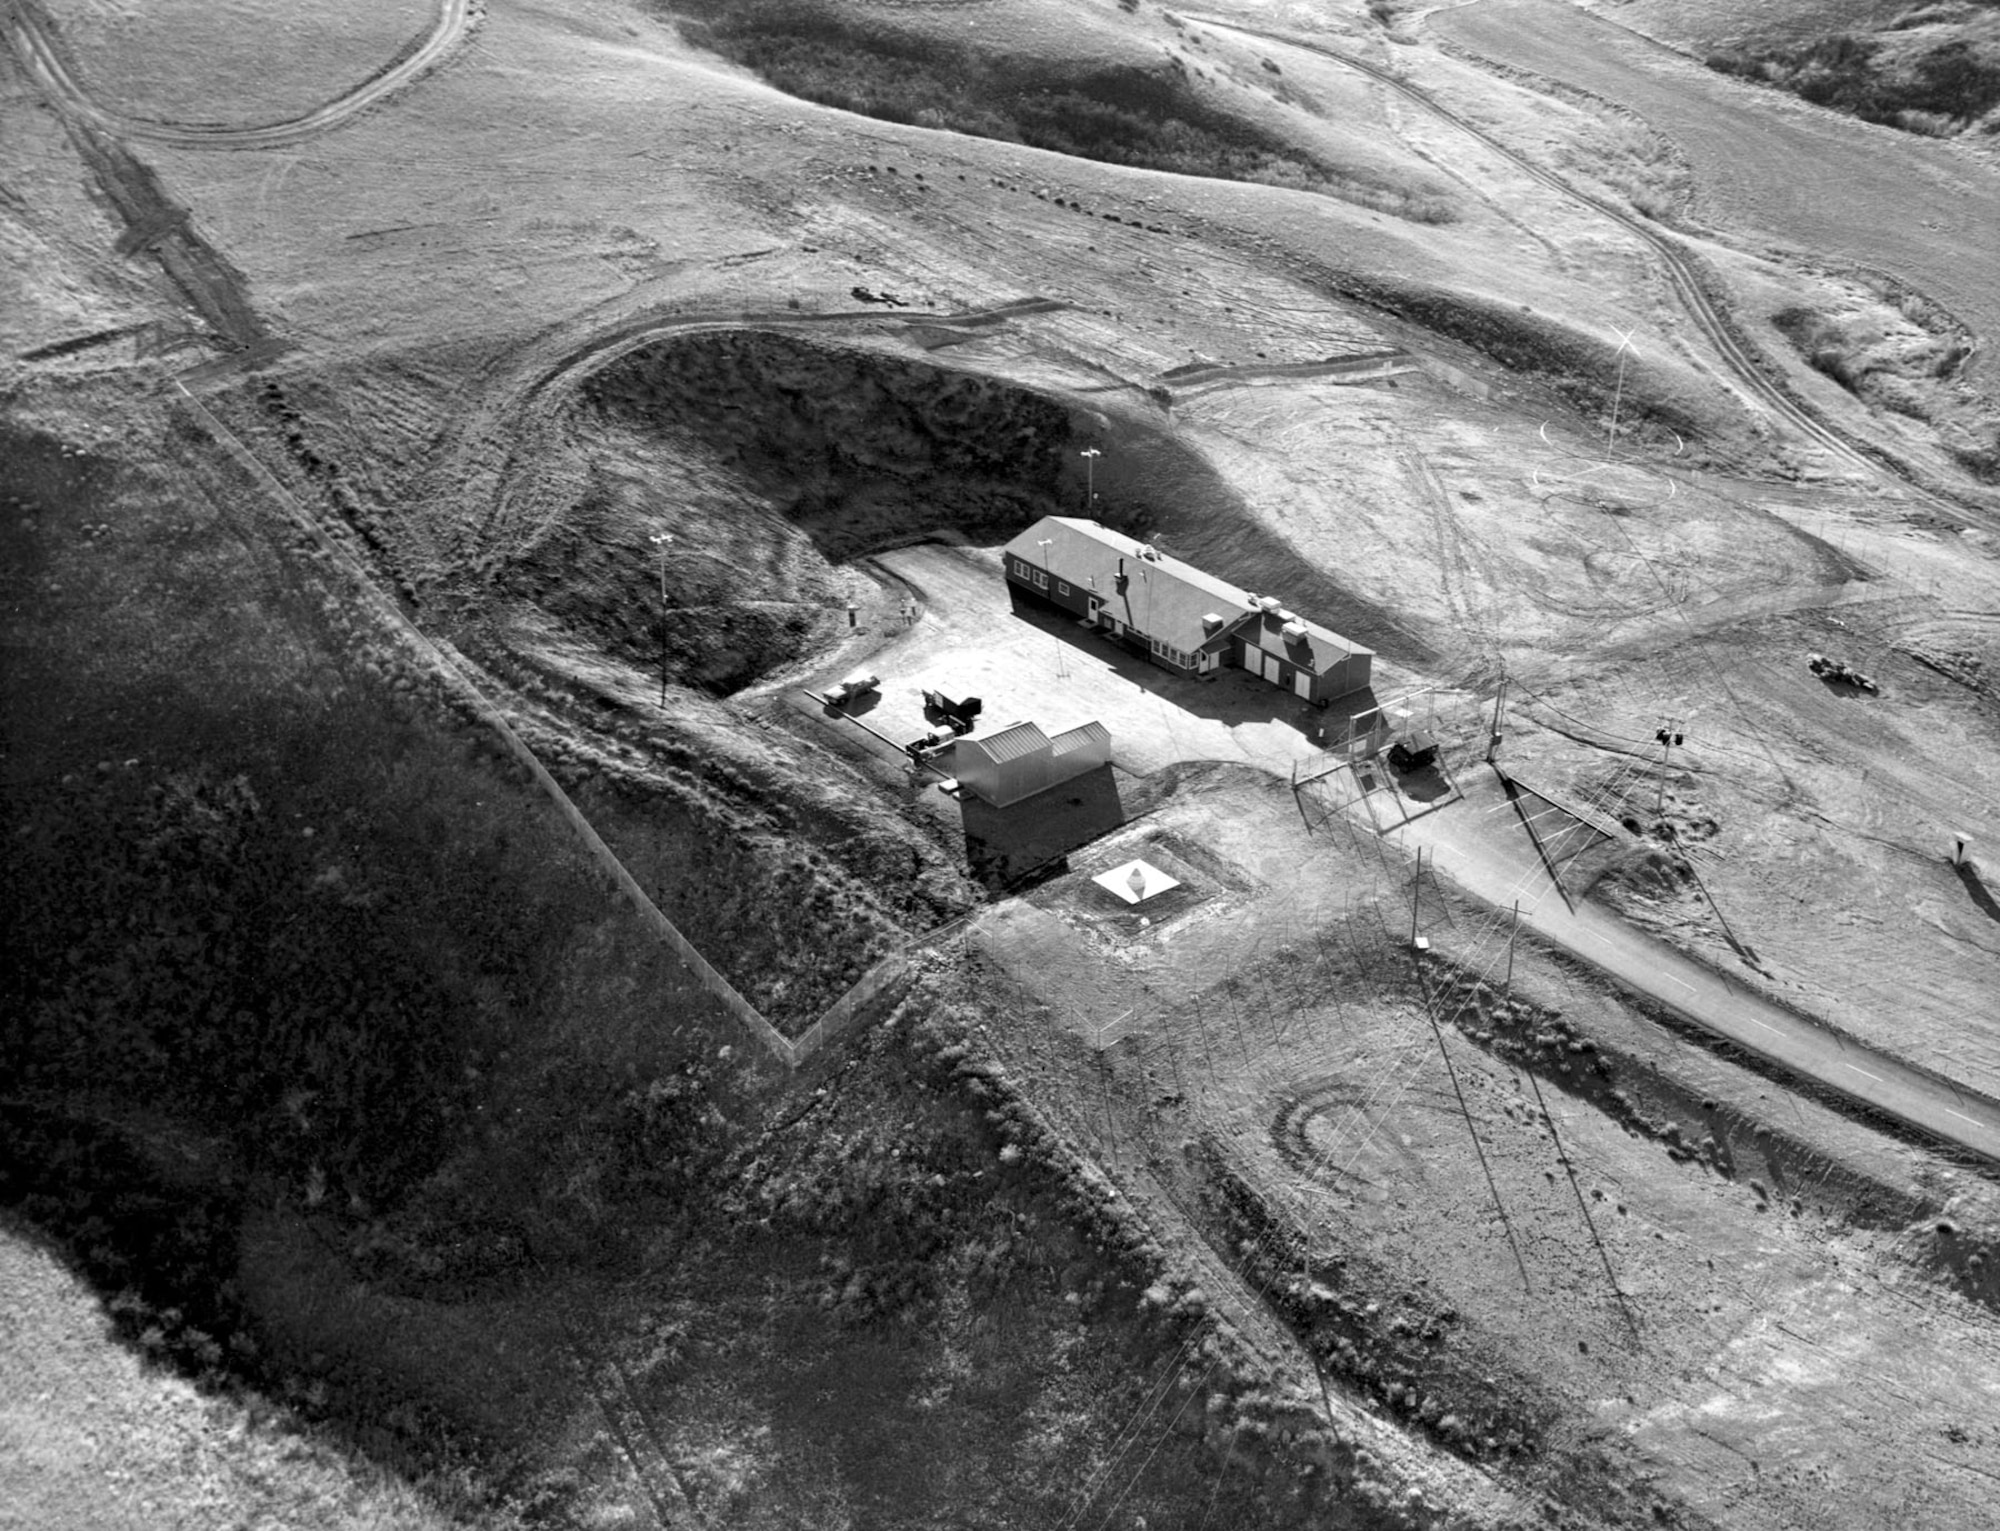 From above, a Minuteman launch control facility seems like only a small fenced structure. It gives few clues to the sophisticated operation underneath. (U.S. Air Force photo)